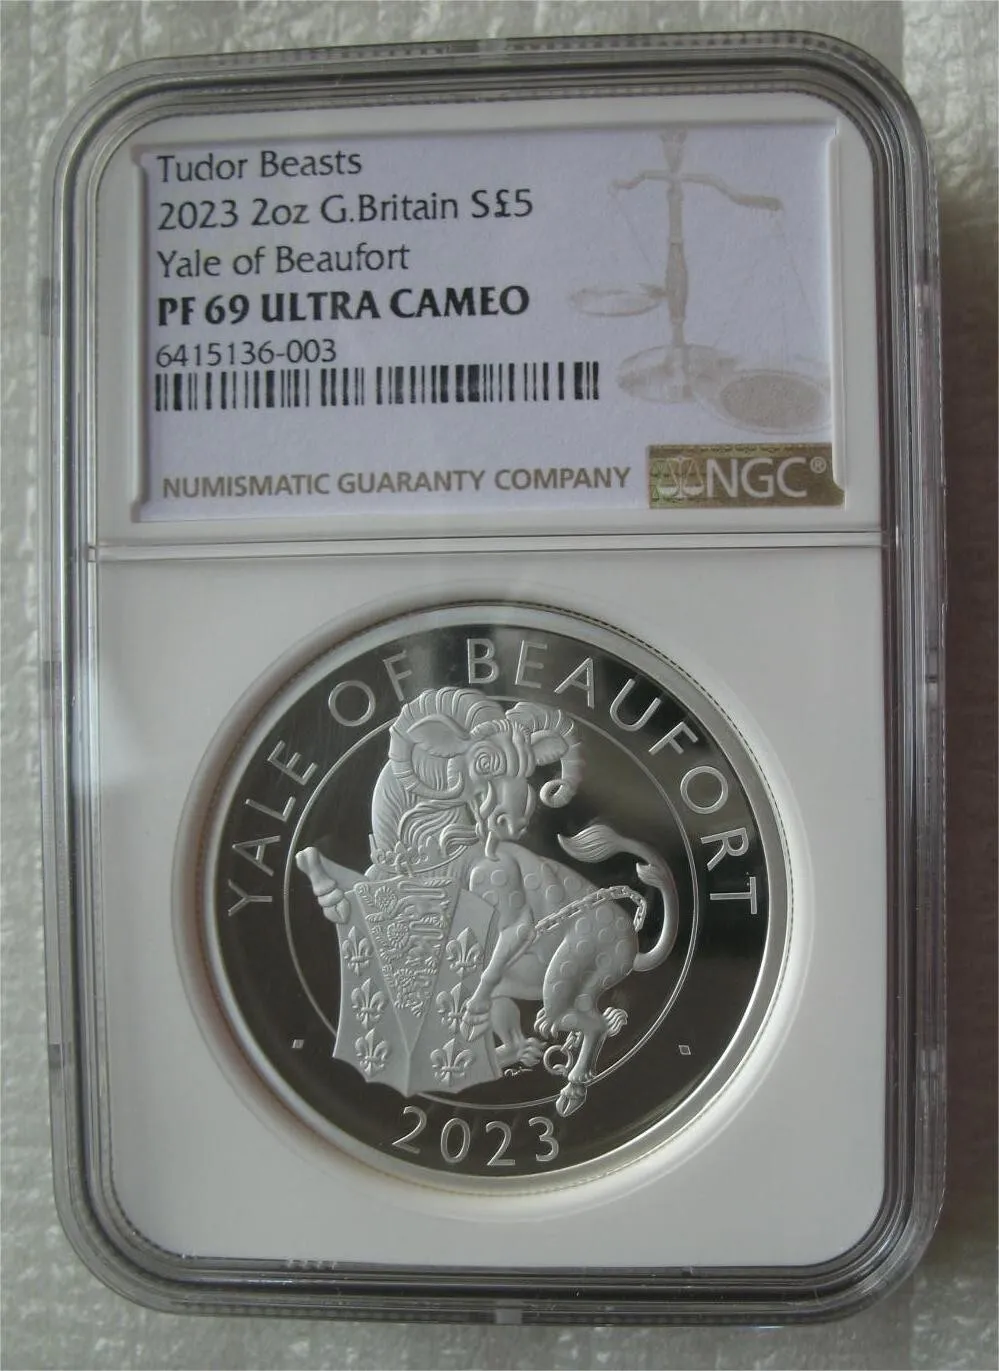 Great Britain Uk £5 2023 Silver 2oz Tudor Beasts The Yale Of Beaufort Ngc Pf69